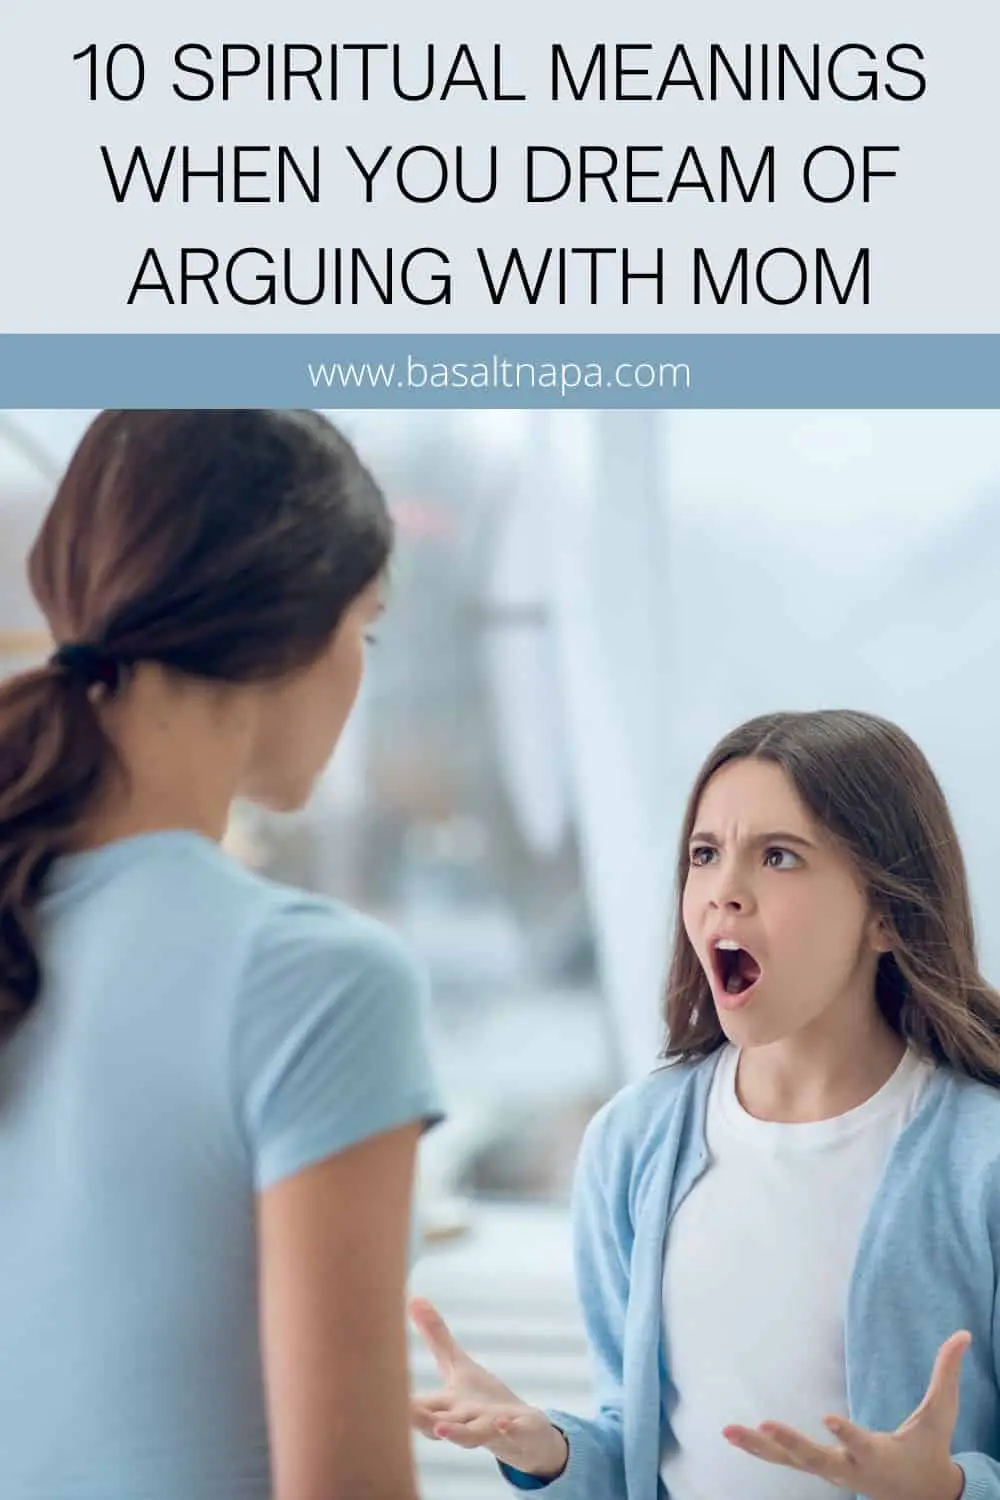 Tips To Avoid Arguing With Mom In Dreams